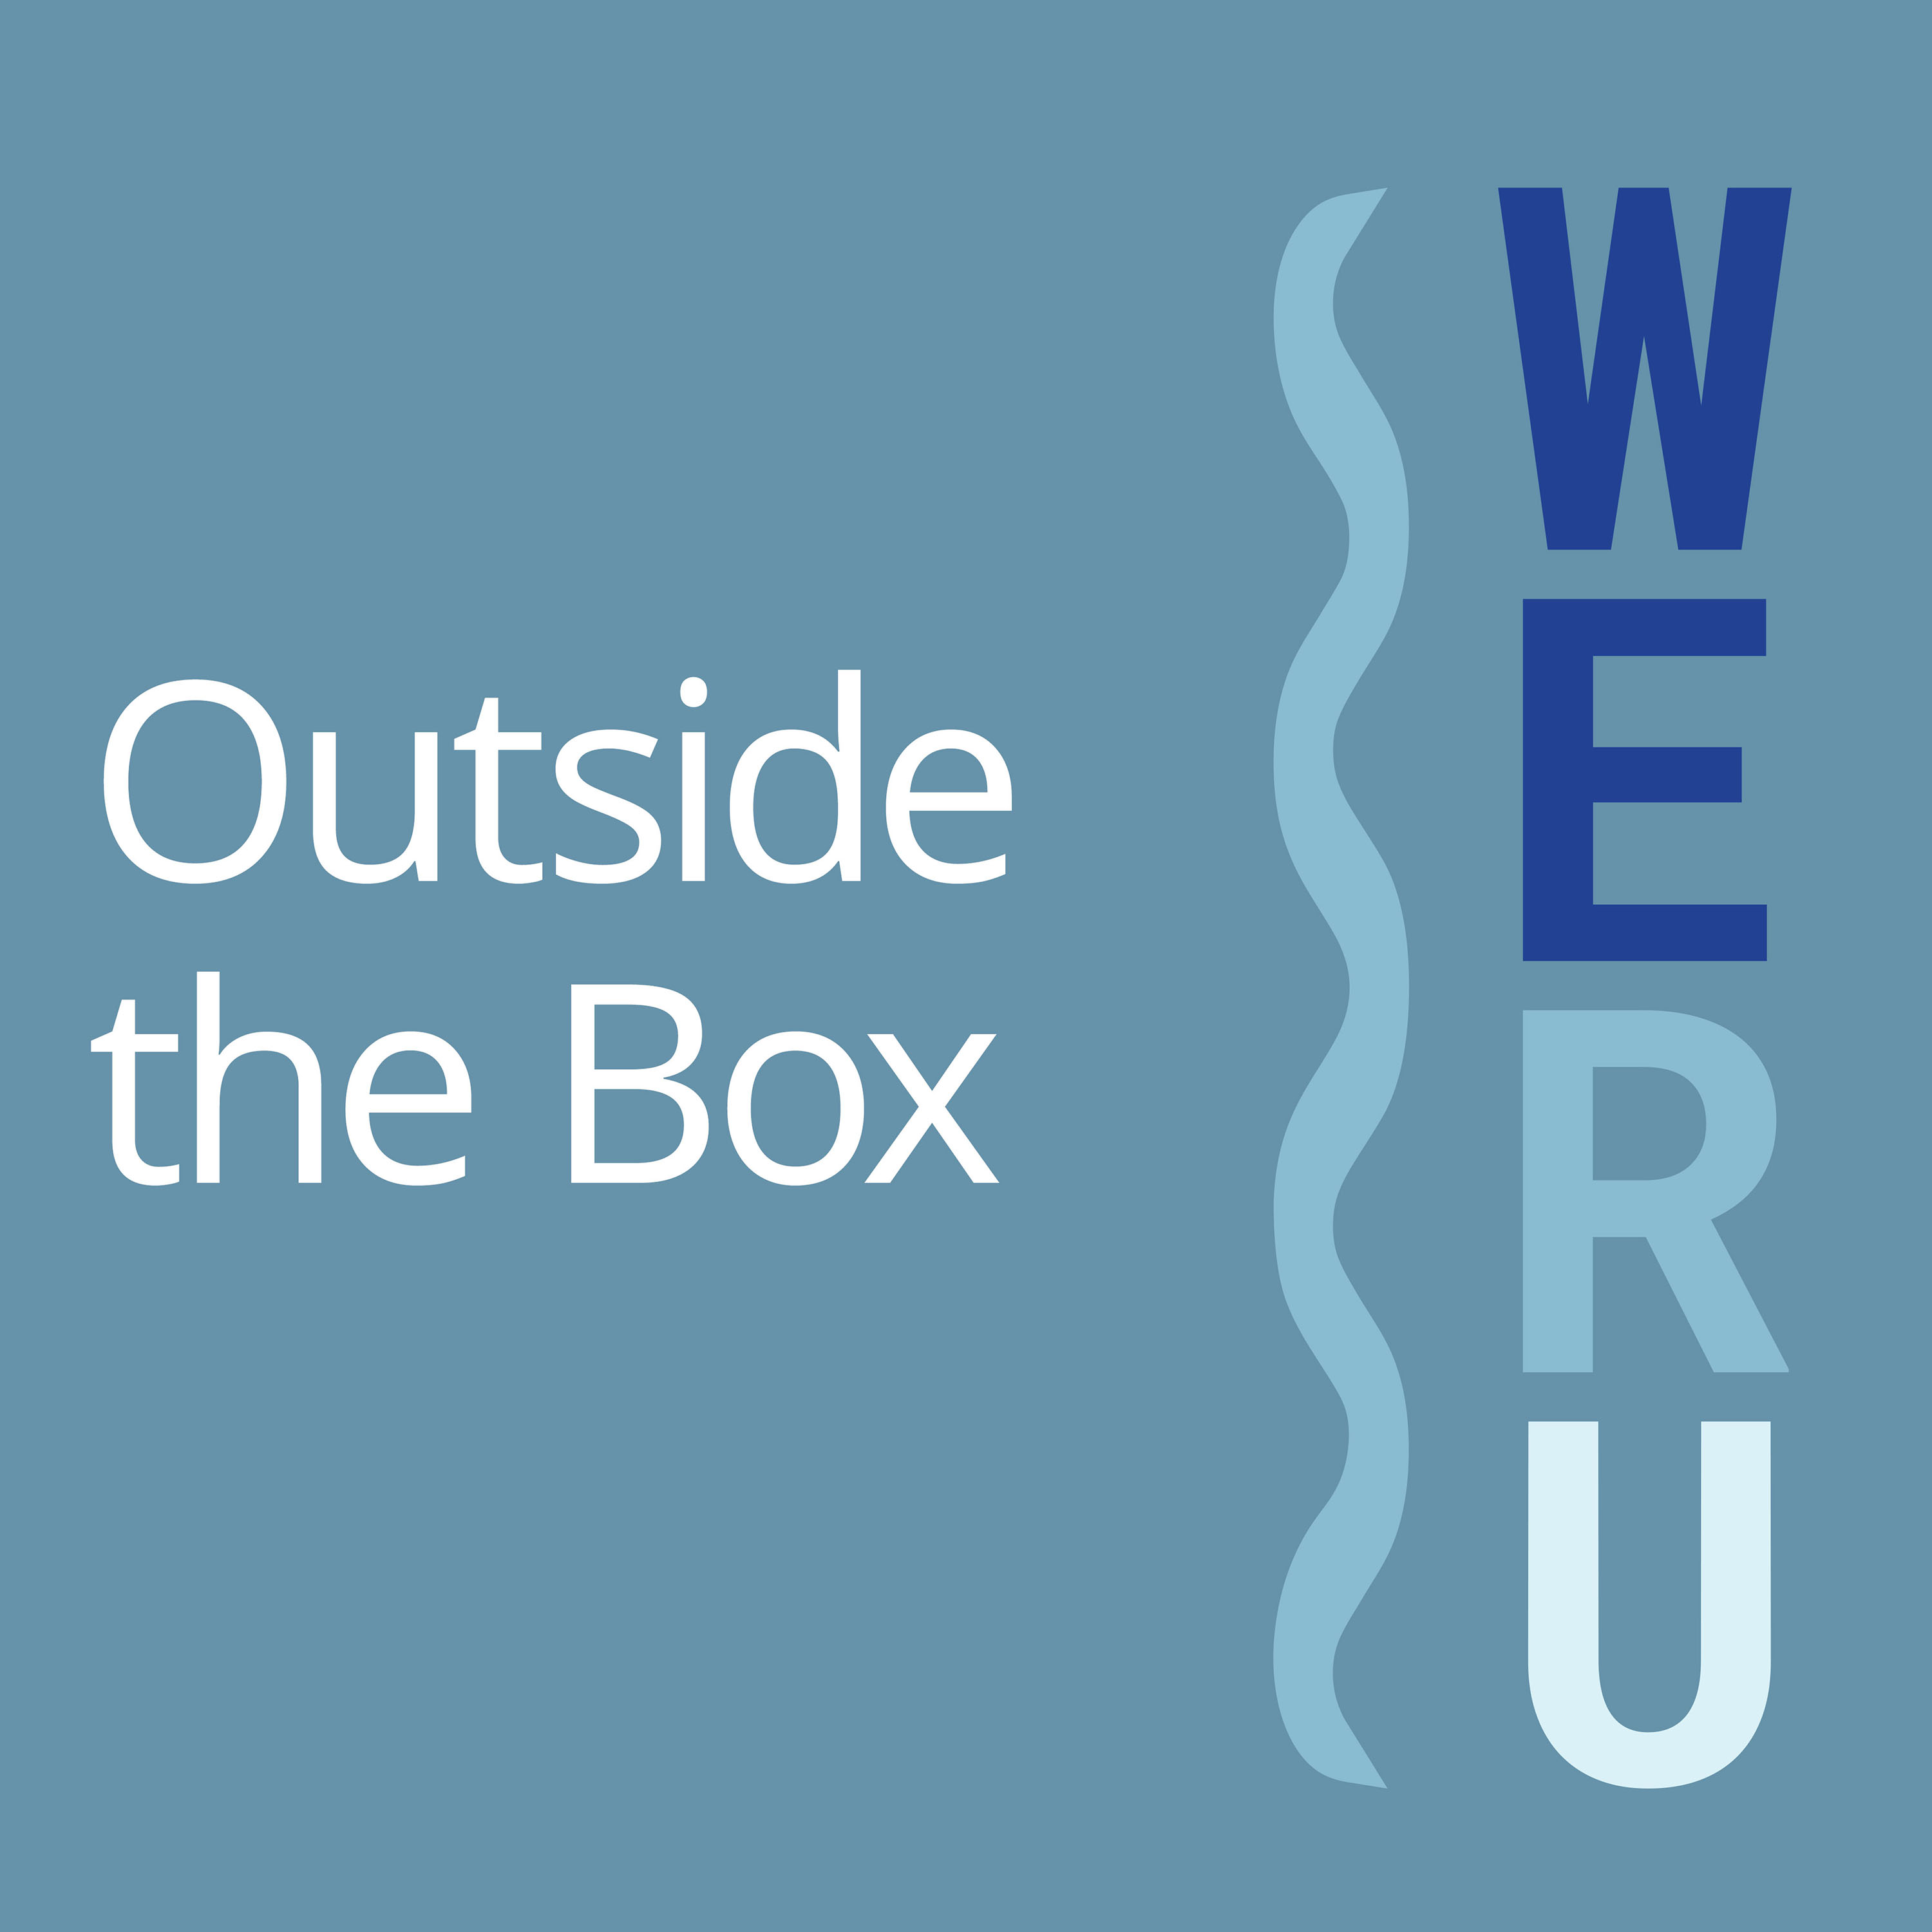 Outside the Box | WERU 89.9 FM Blue Hill, Maine Local News and Public Affairs Archives